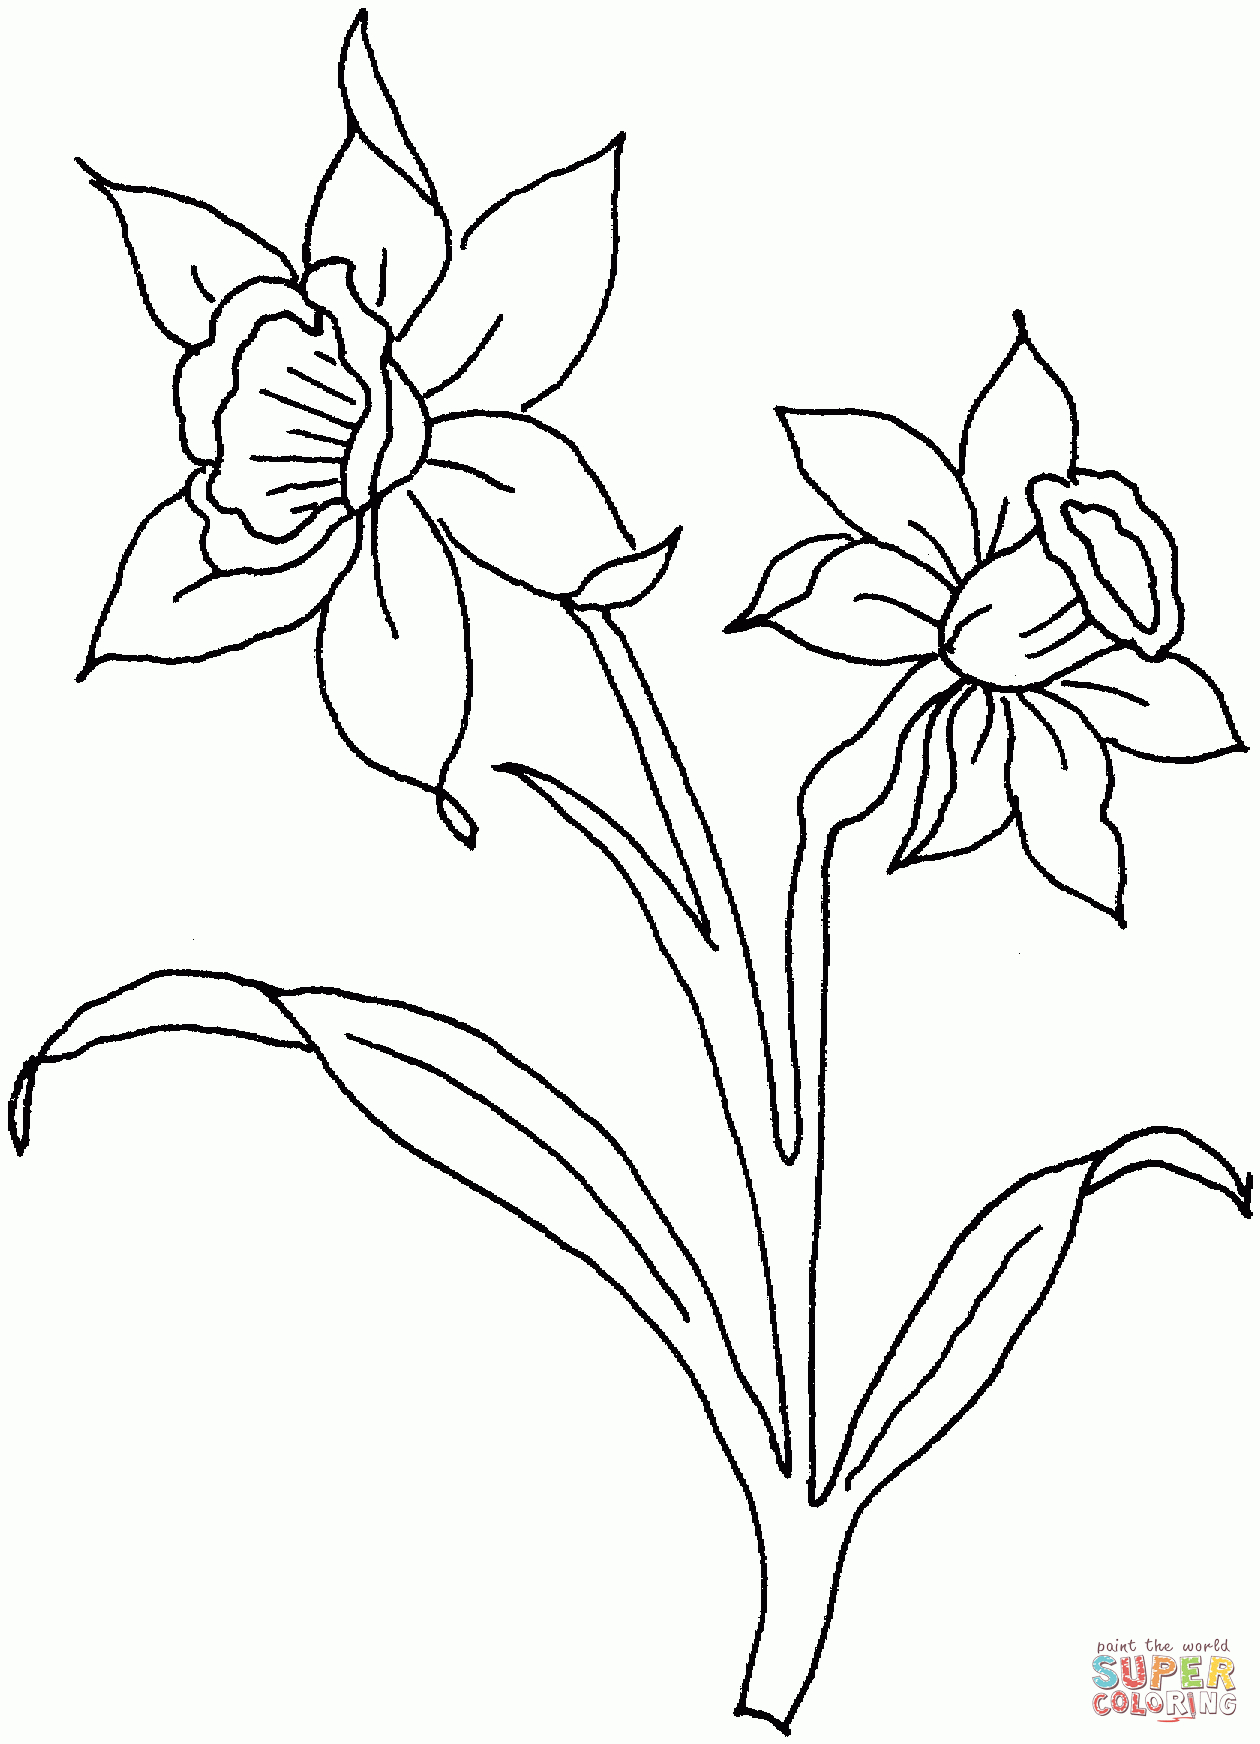 Daffodil Flowers Coloring Page | Free Printable Coloring Pages - Free Printable Pictures Of Daffodils